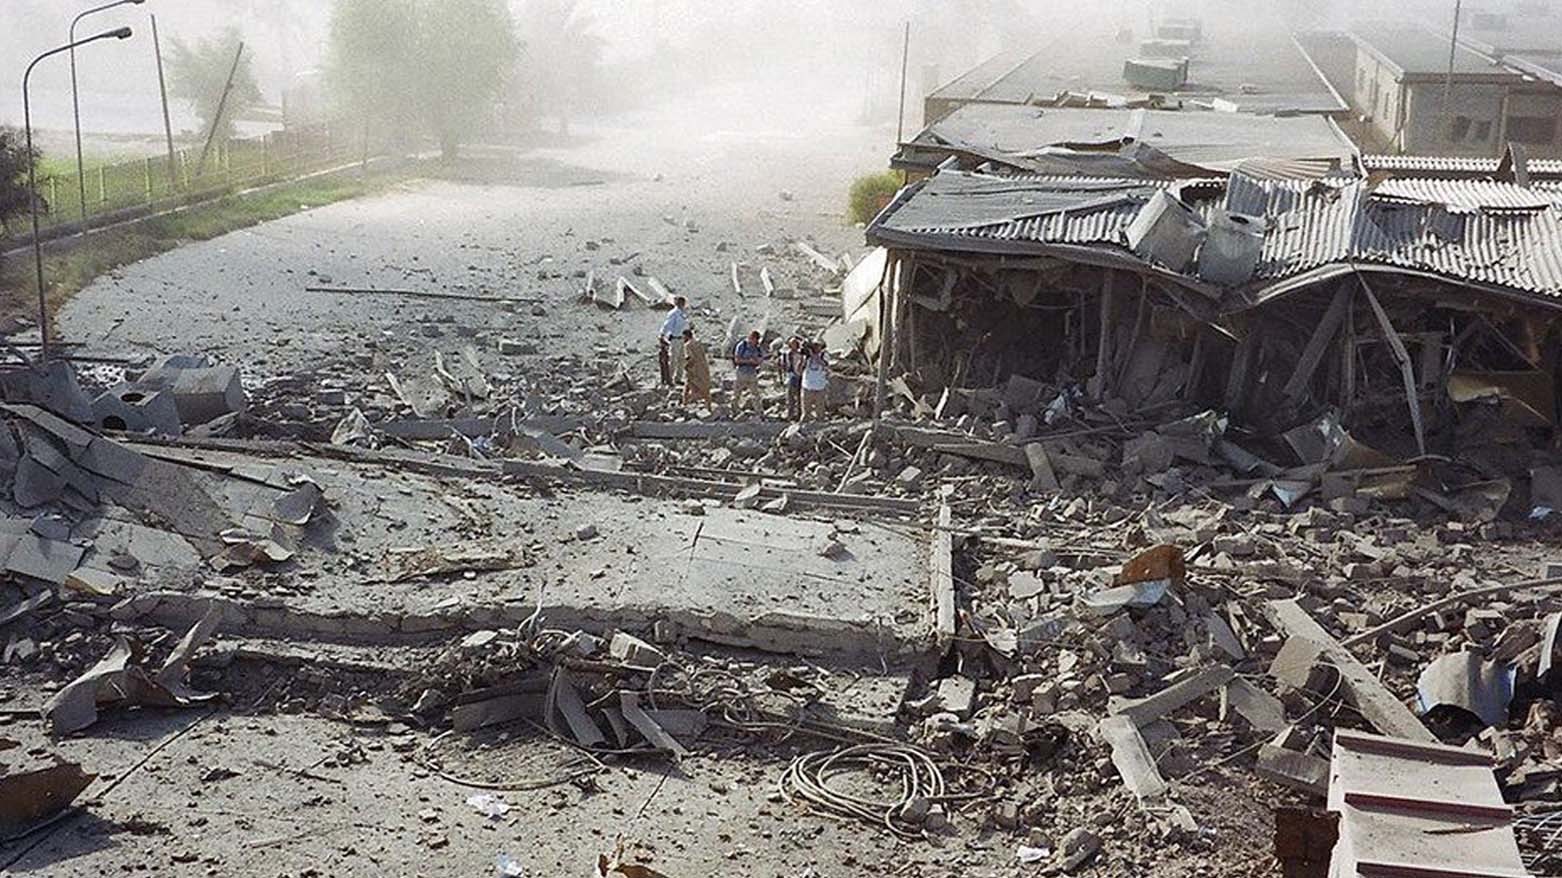 Aftermath of Canal Hotel bombing in Baghdad, where the UN envoy to Iraq was killed along with more than 20 other UN staffers, Aug. 19, 2003.  (Photo: UNAMI)